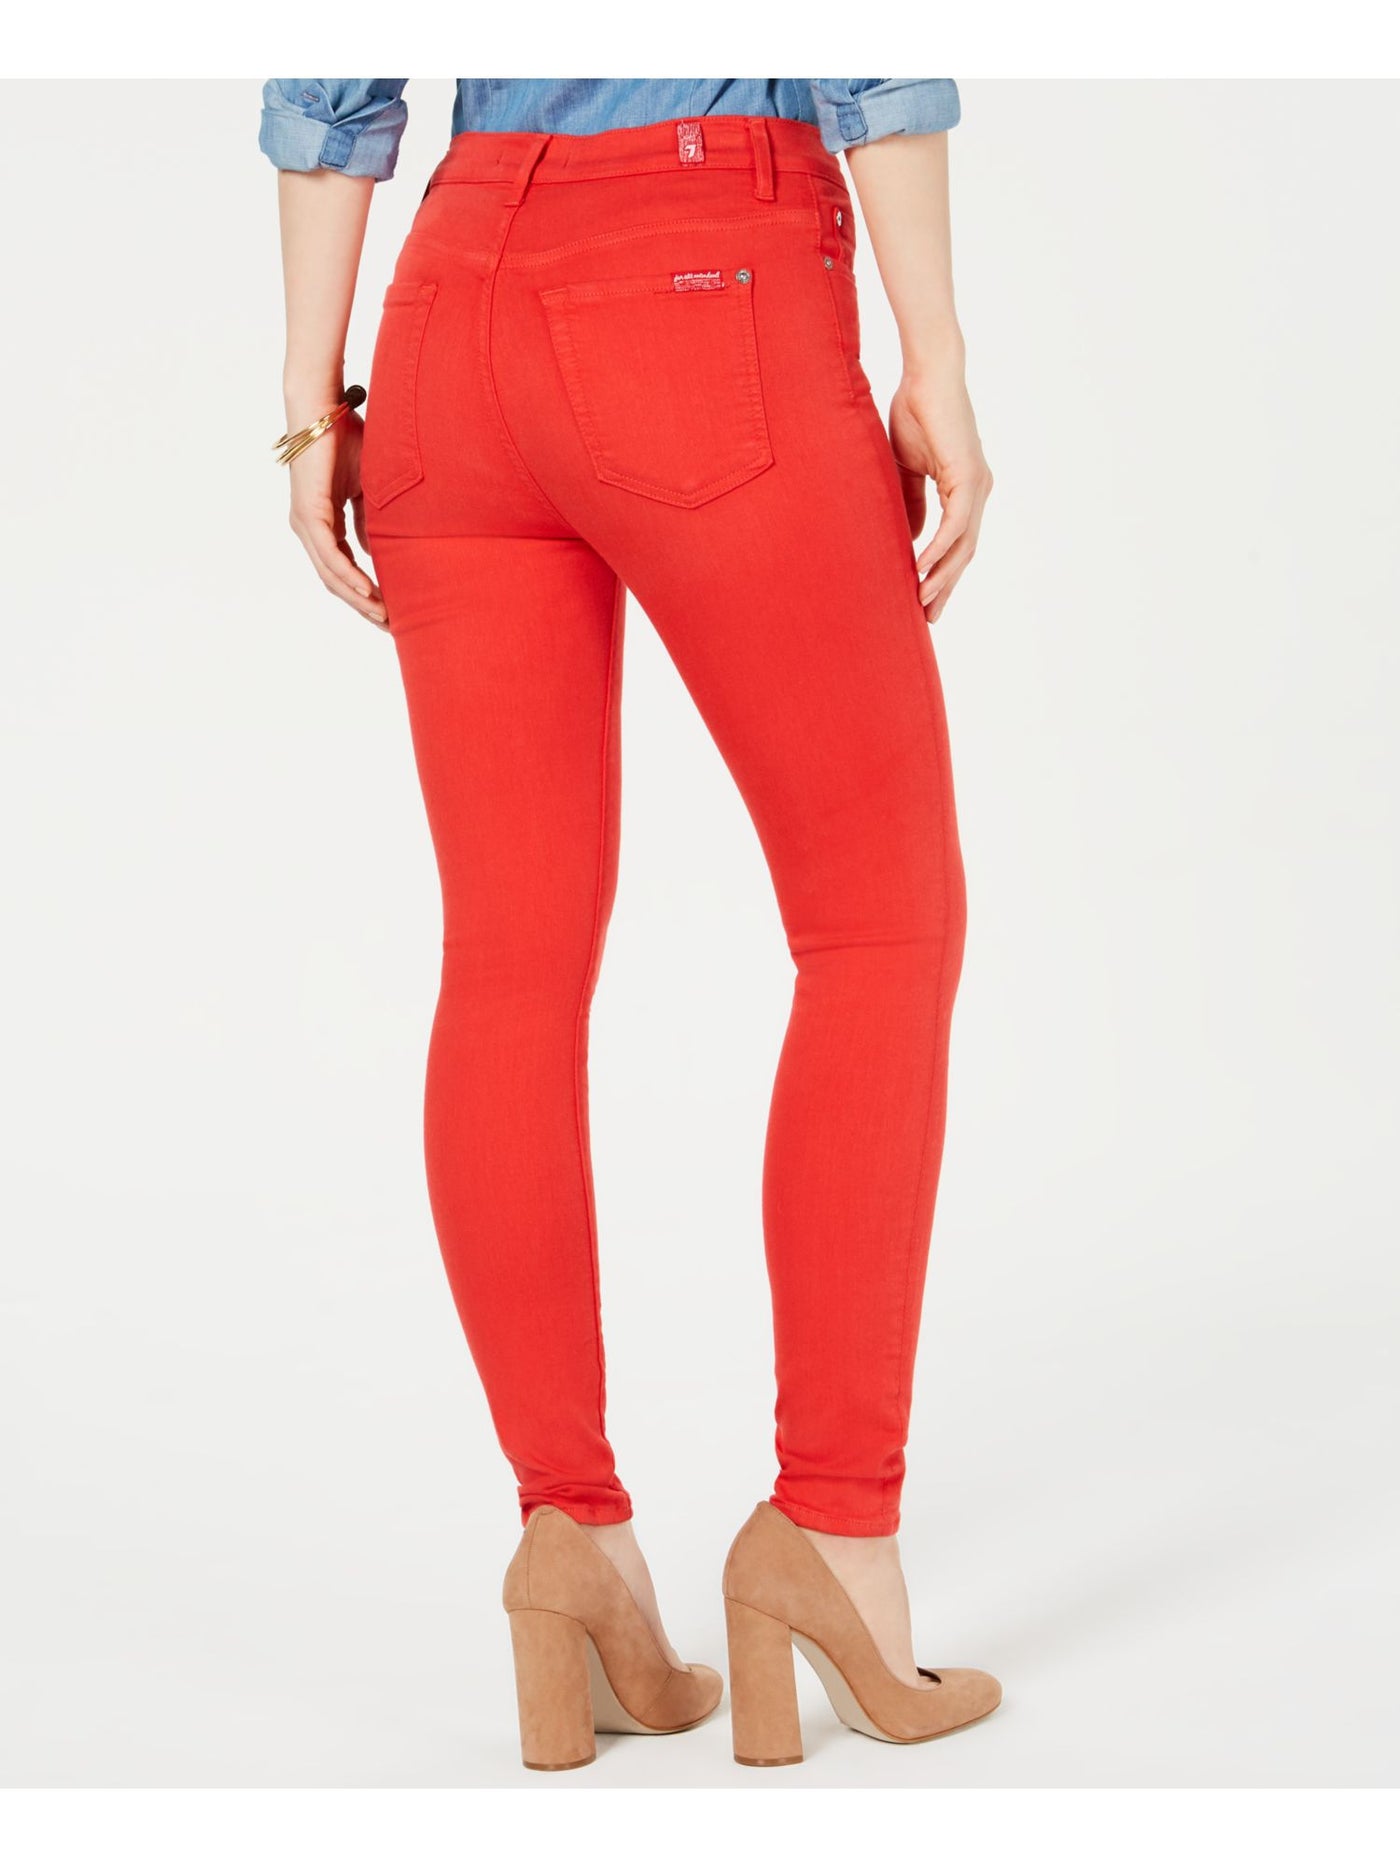 7 FOR ALL MANKIND Womens Coral Skinny Pants Size: 24